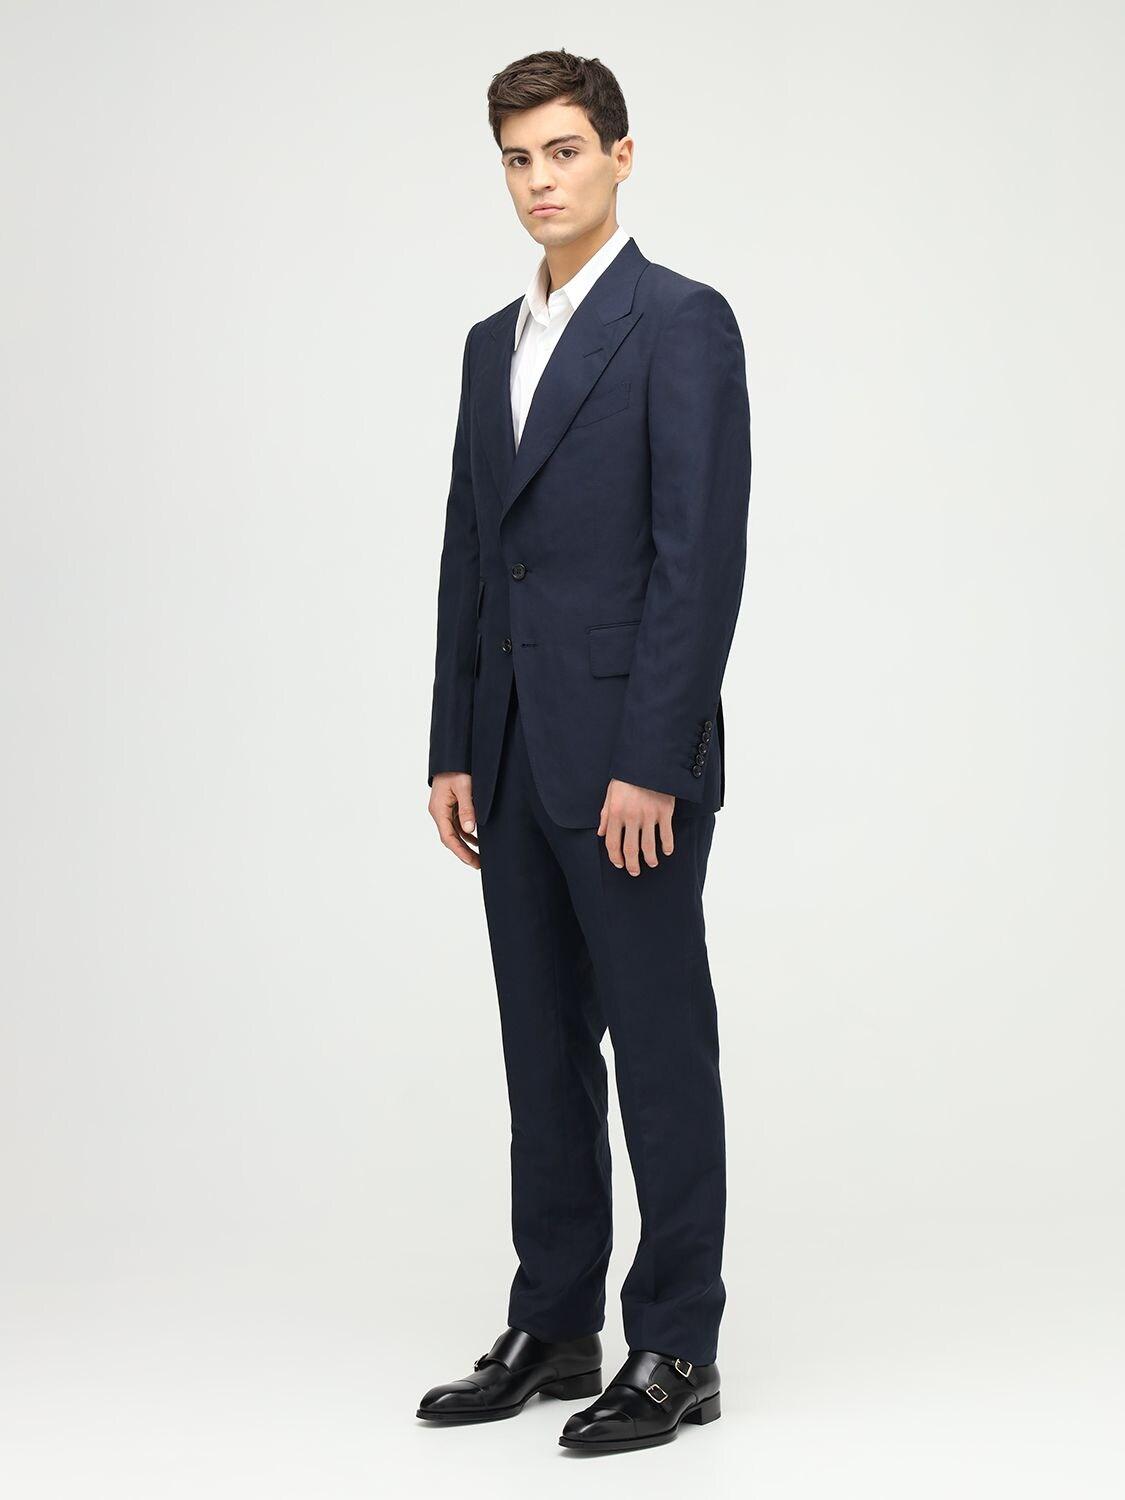 Tom Ford Silk & Linen Poplin Day Suit in Navy (Blue) for Men - Save 50% |  Lyst